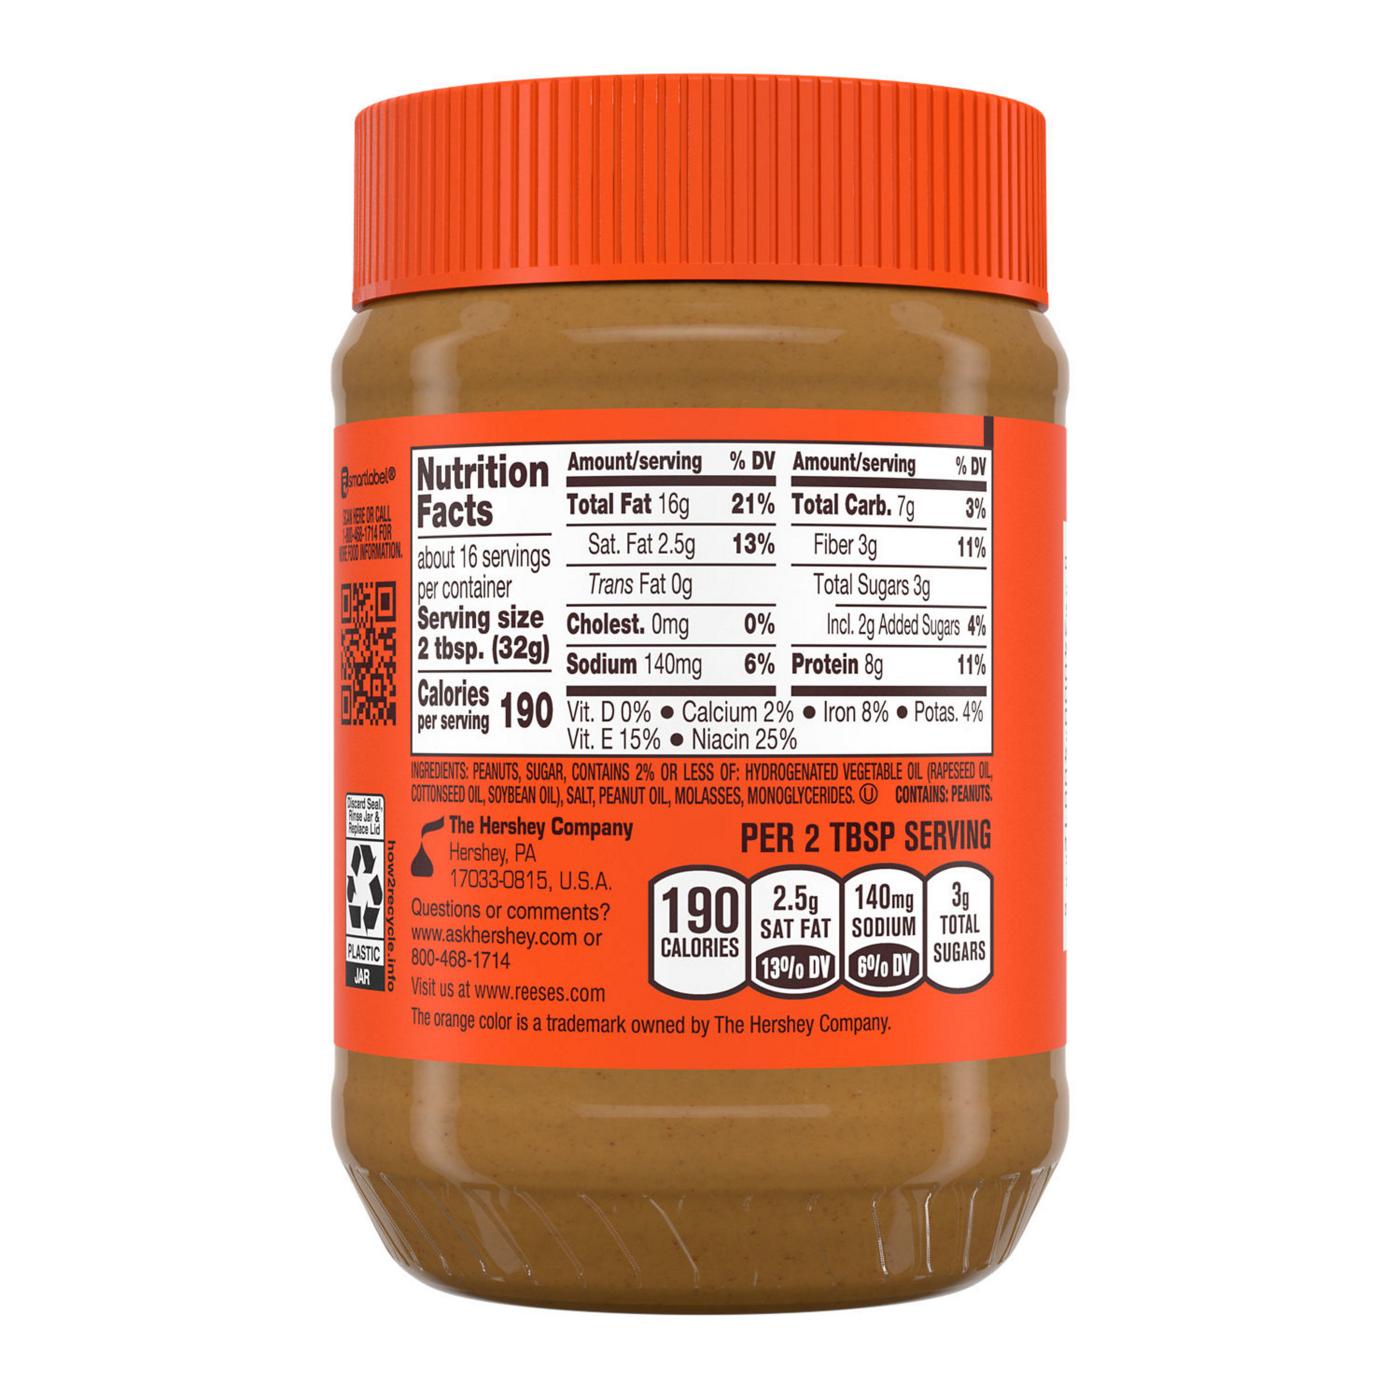 Reese's Creamy Peanut Butter; image 6 of 7